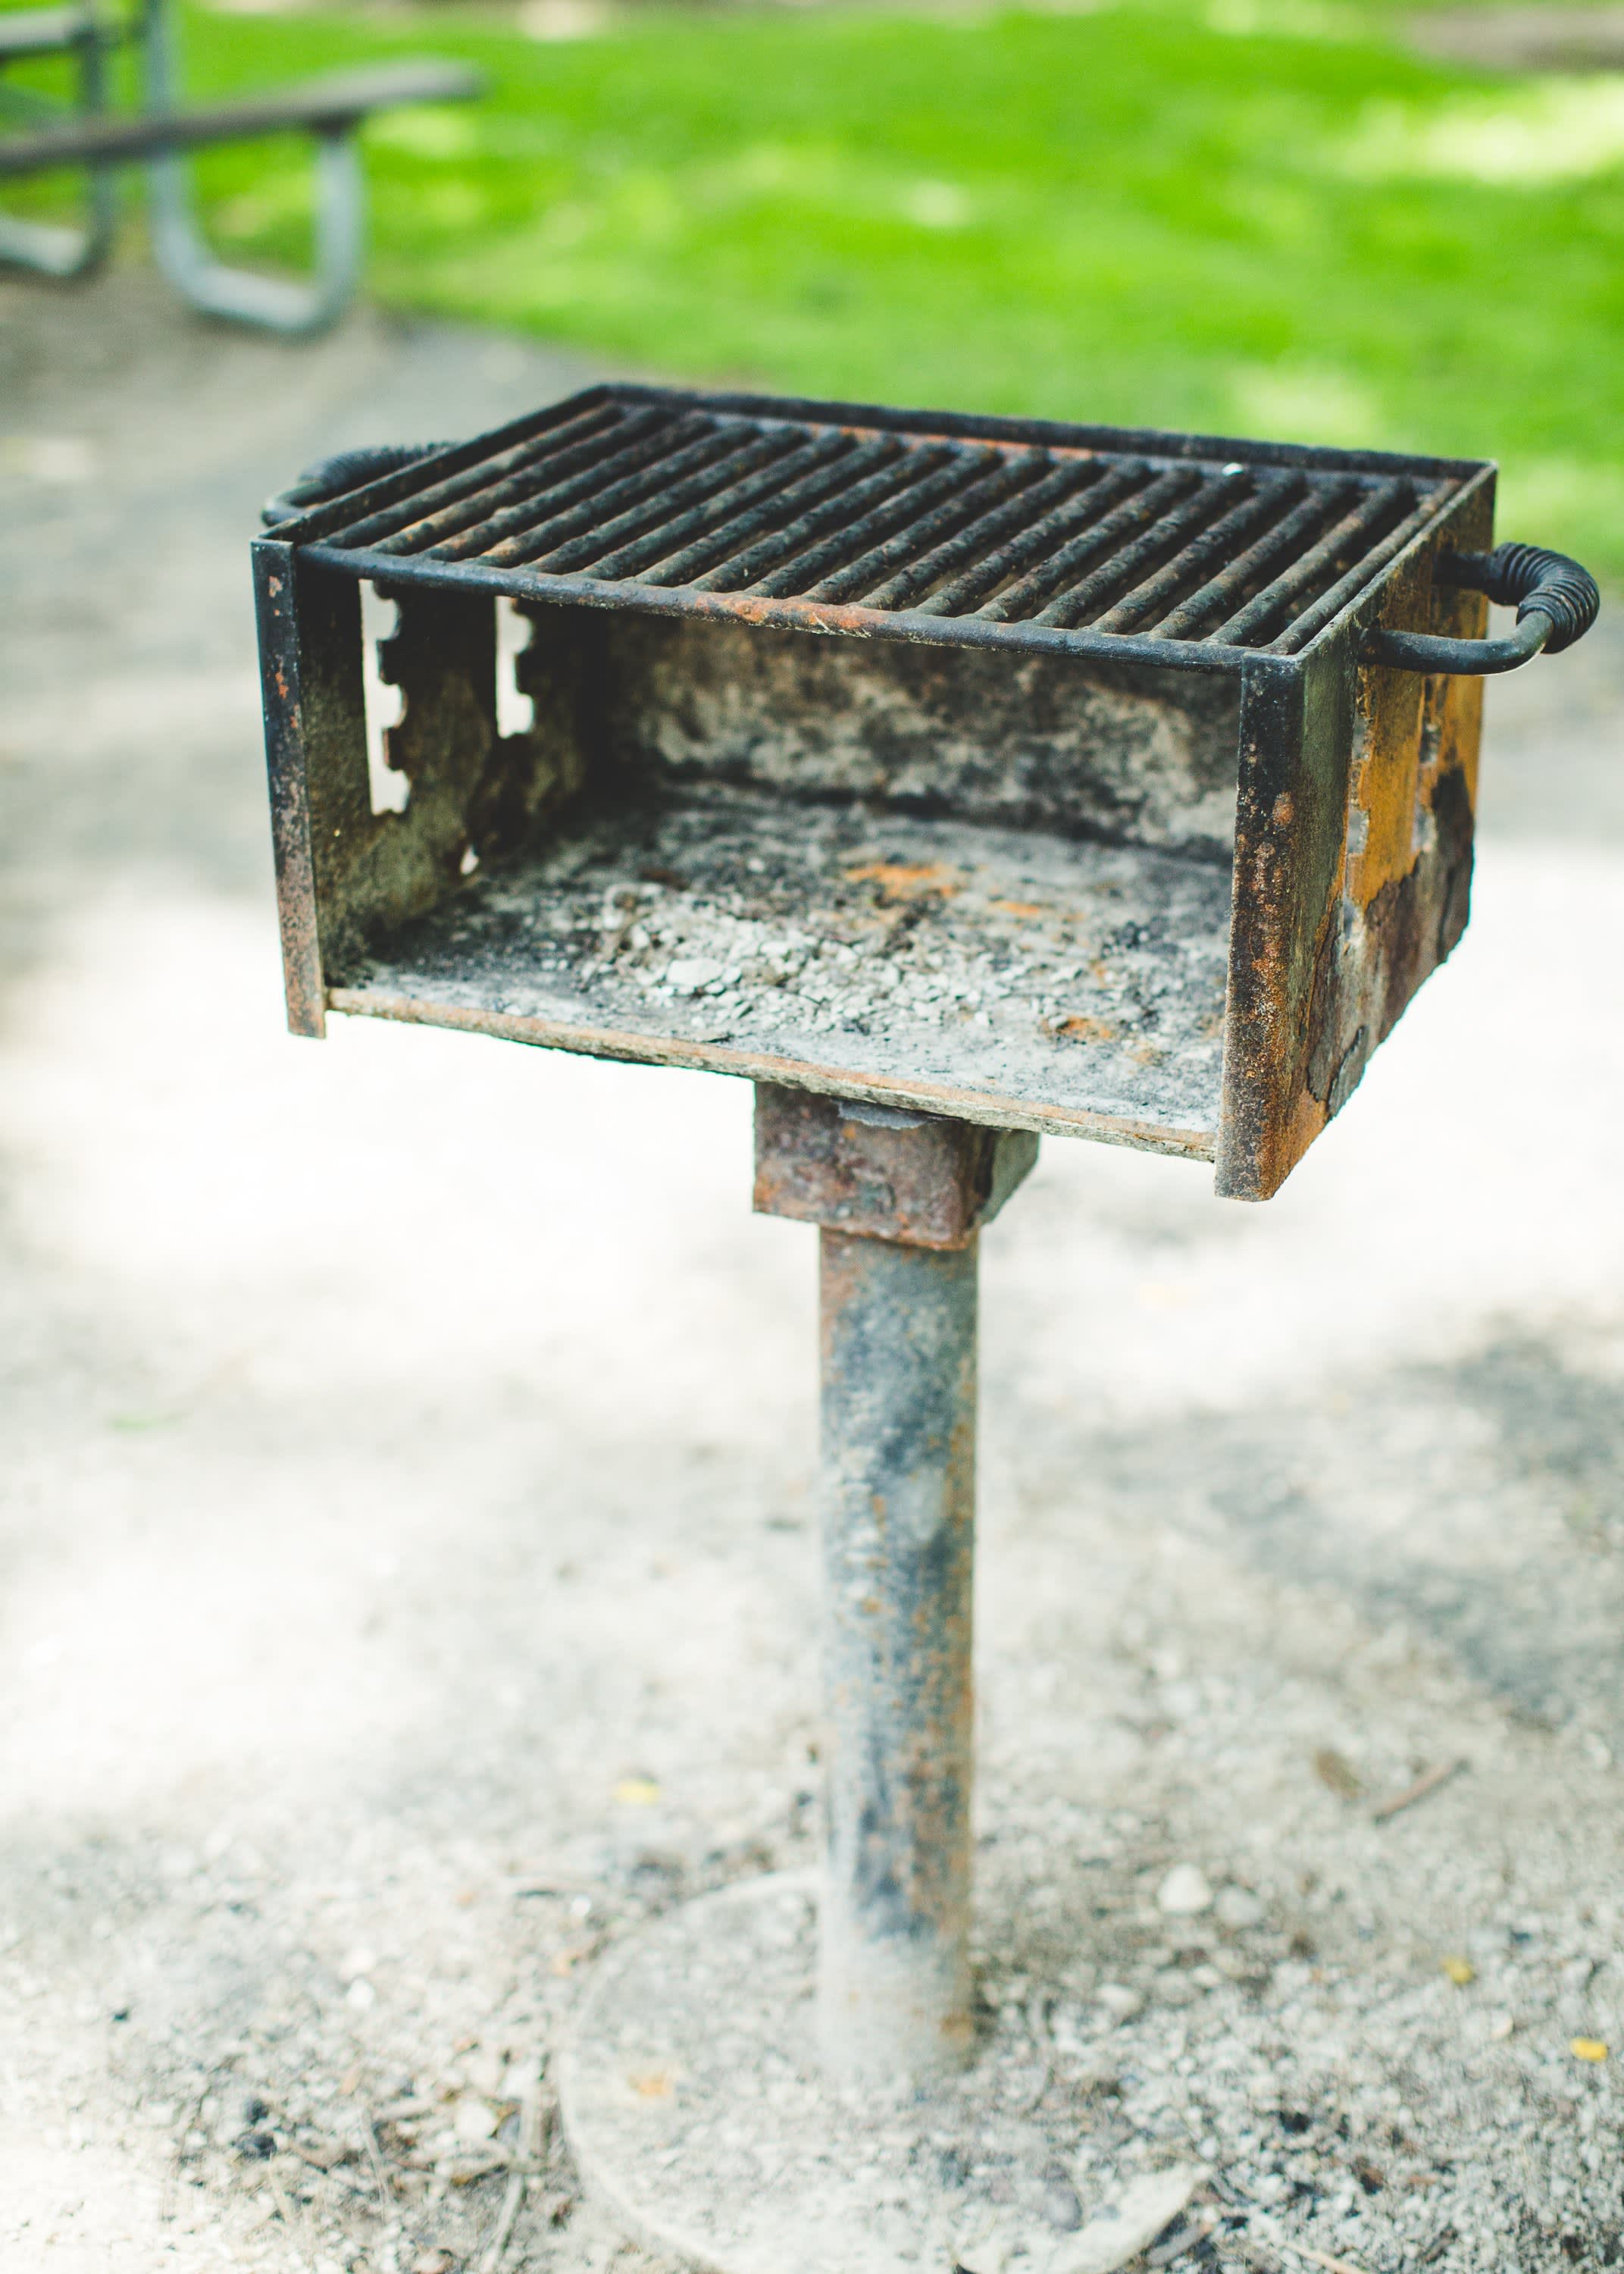 How To Clean a Charcoal Grill